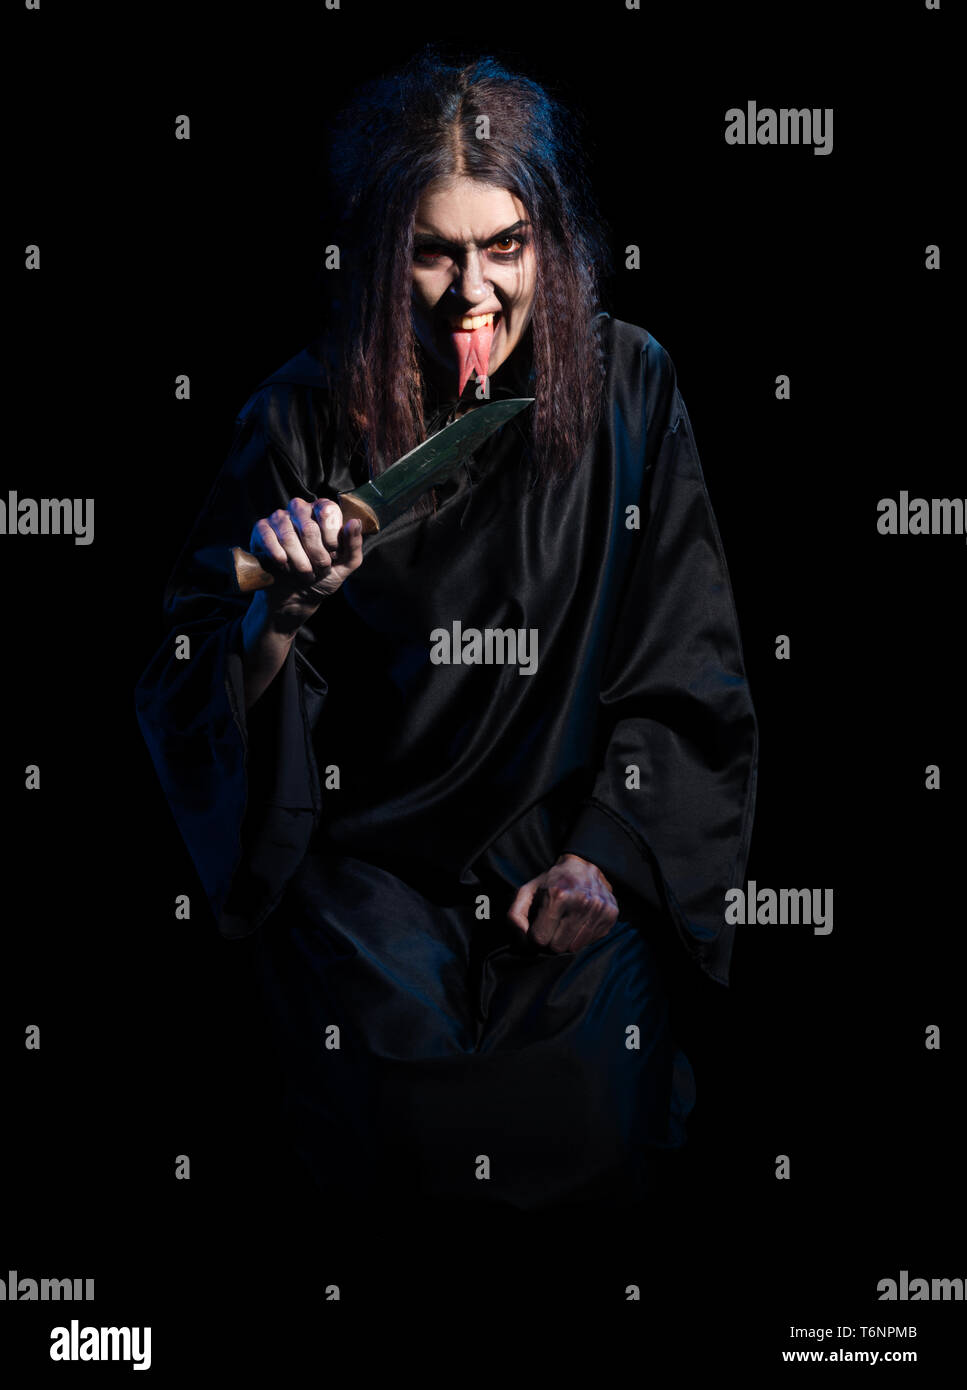 Scary witch isolata senza voodoo doll versione Foto Stock